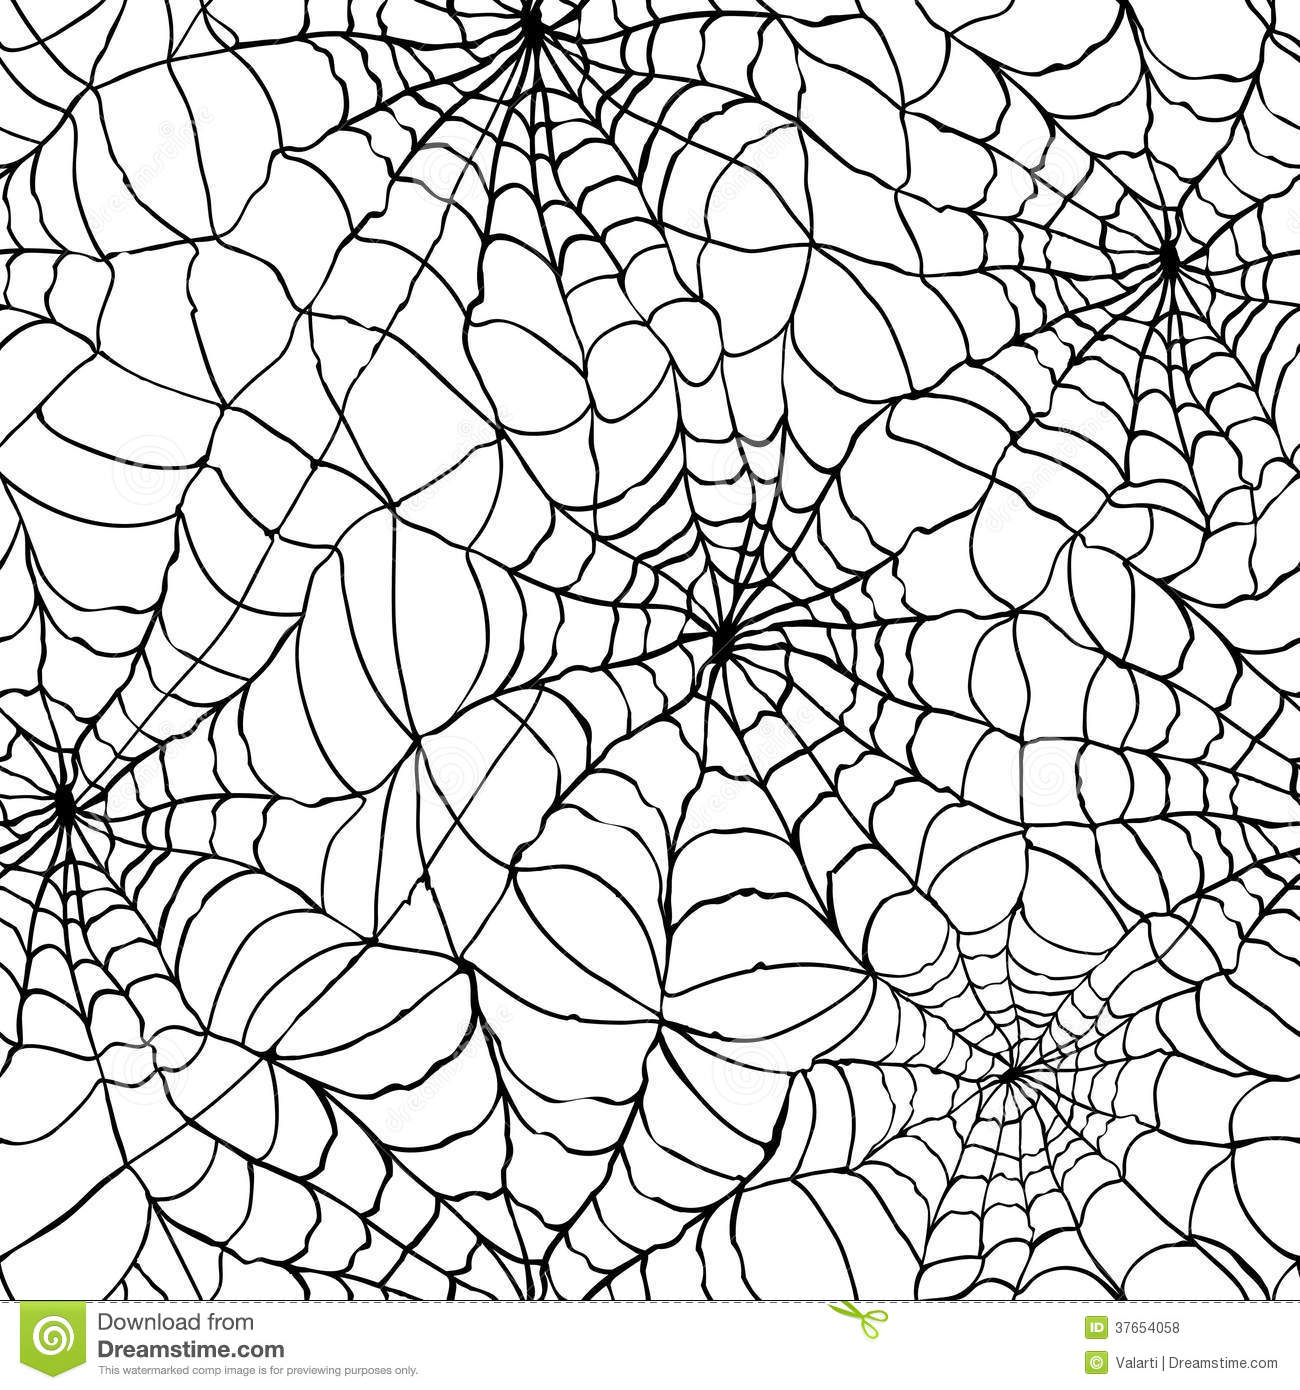 Spider Web Drawing Easy at GetDrawings Free download